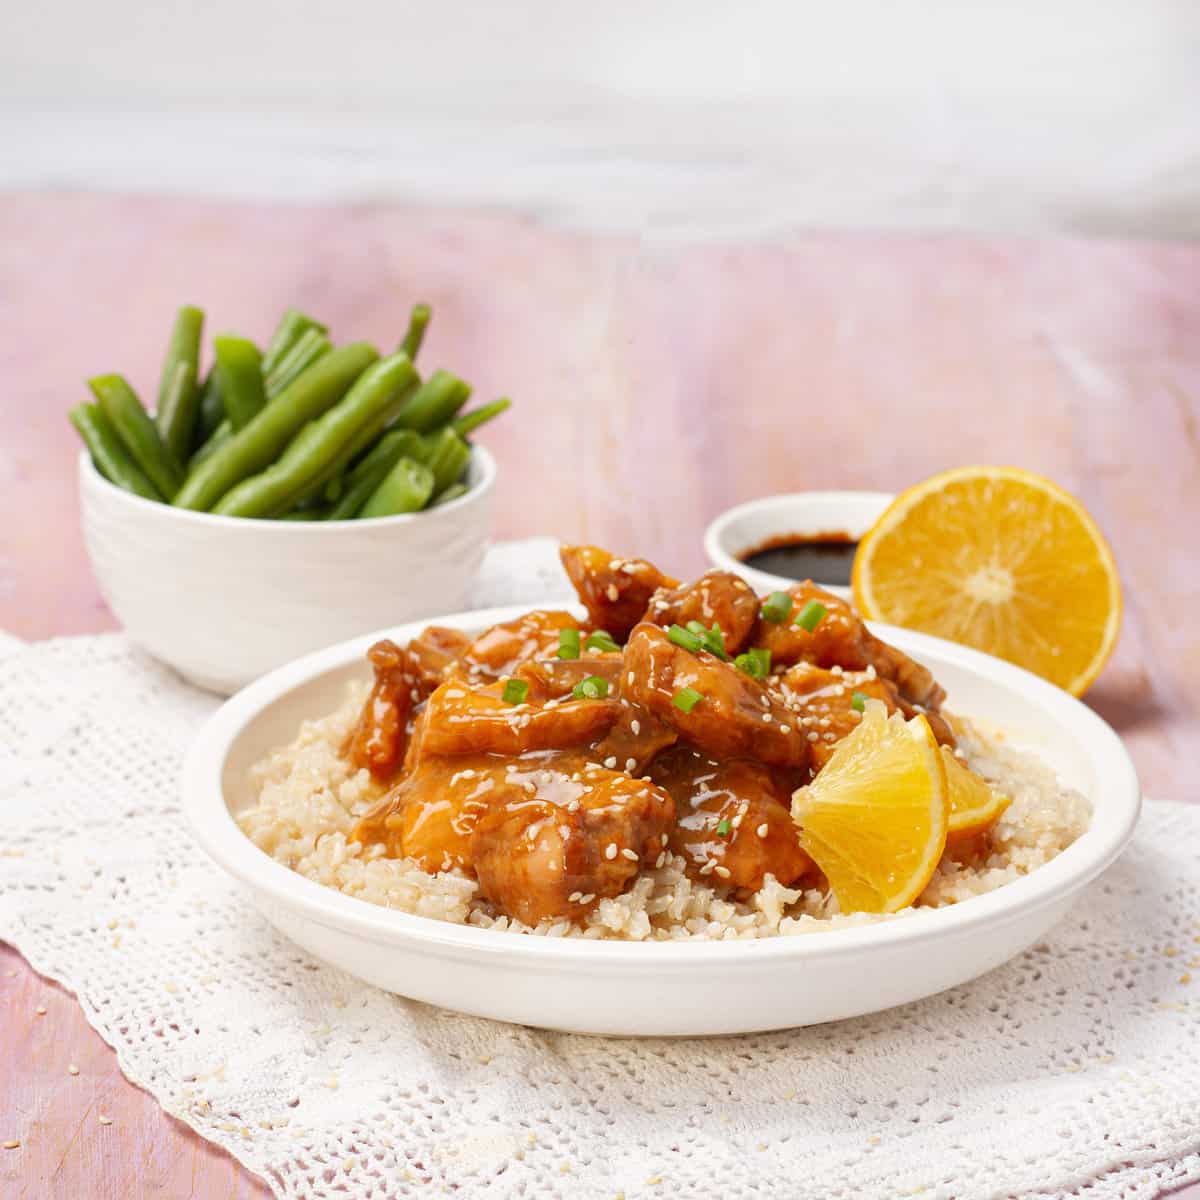 Orange Chicken served with lemon and bowl of beans